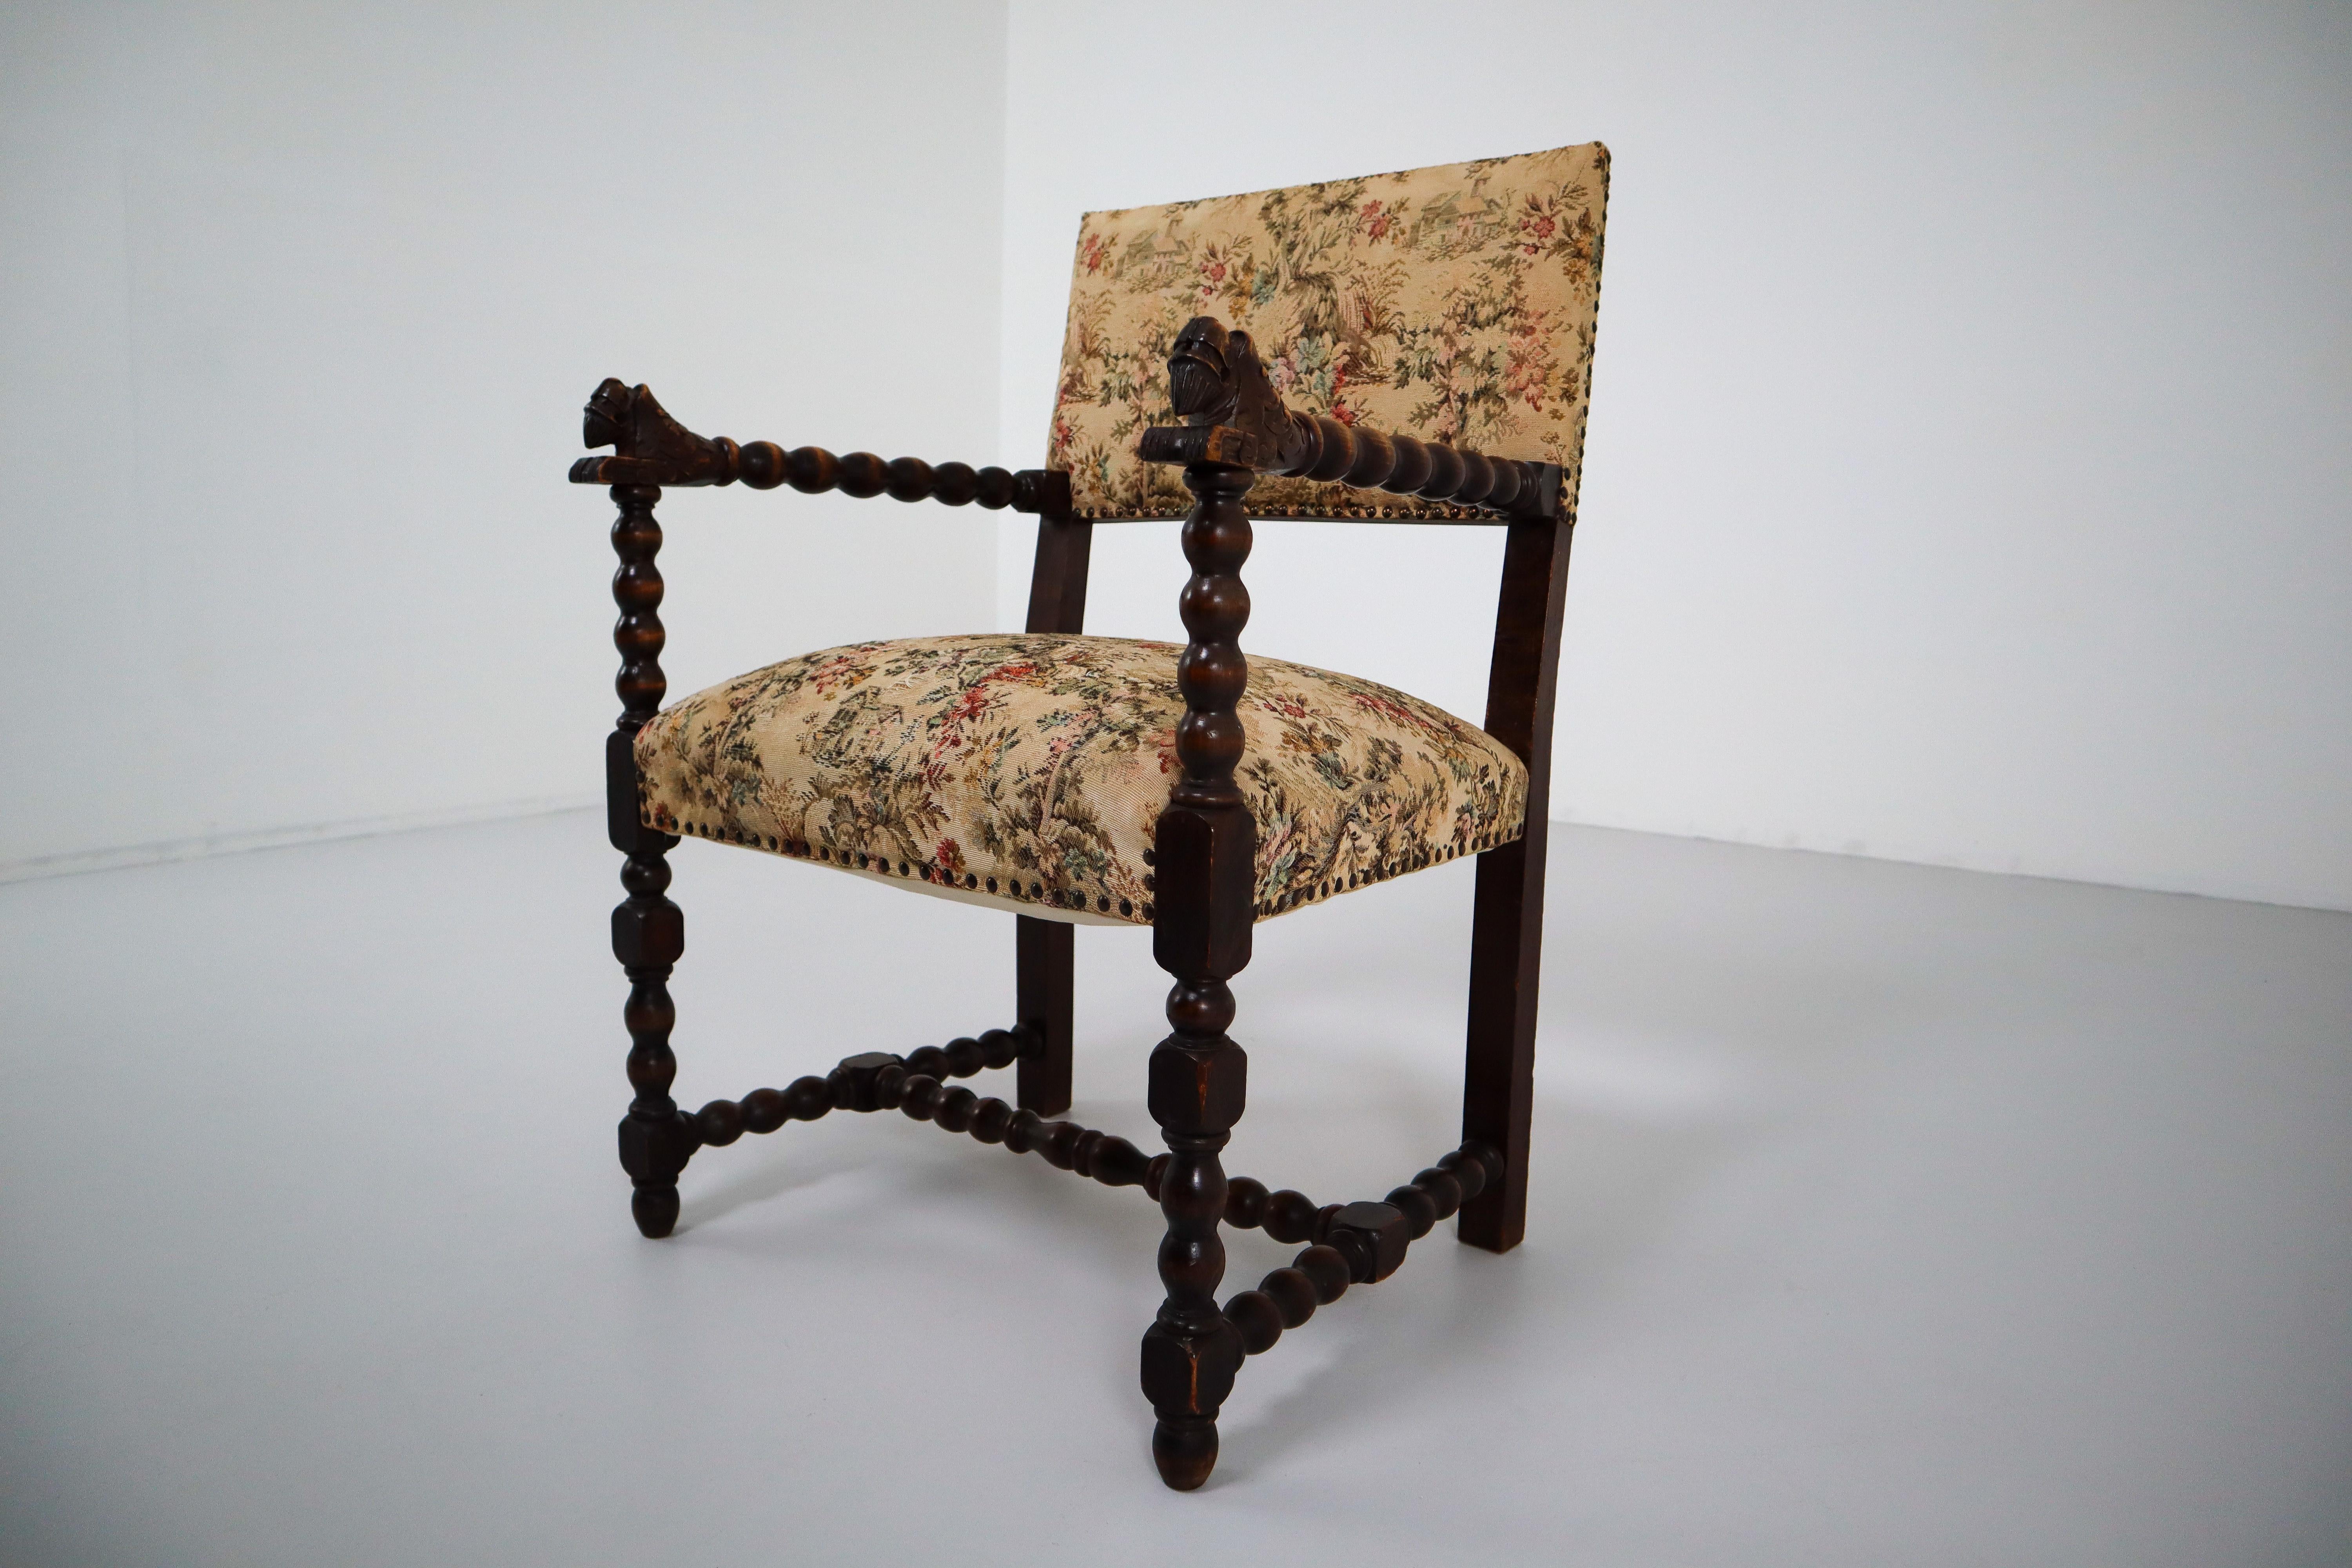 Fabulous carved oak chair from France. Original fabric that shows some minor stains and age appropriate wear. France, 1870.